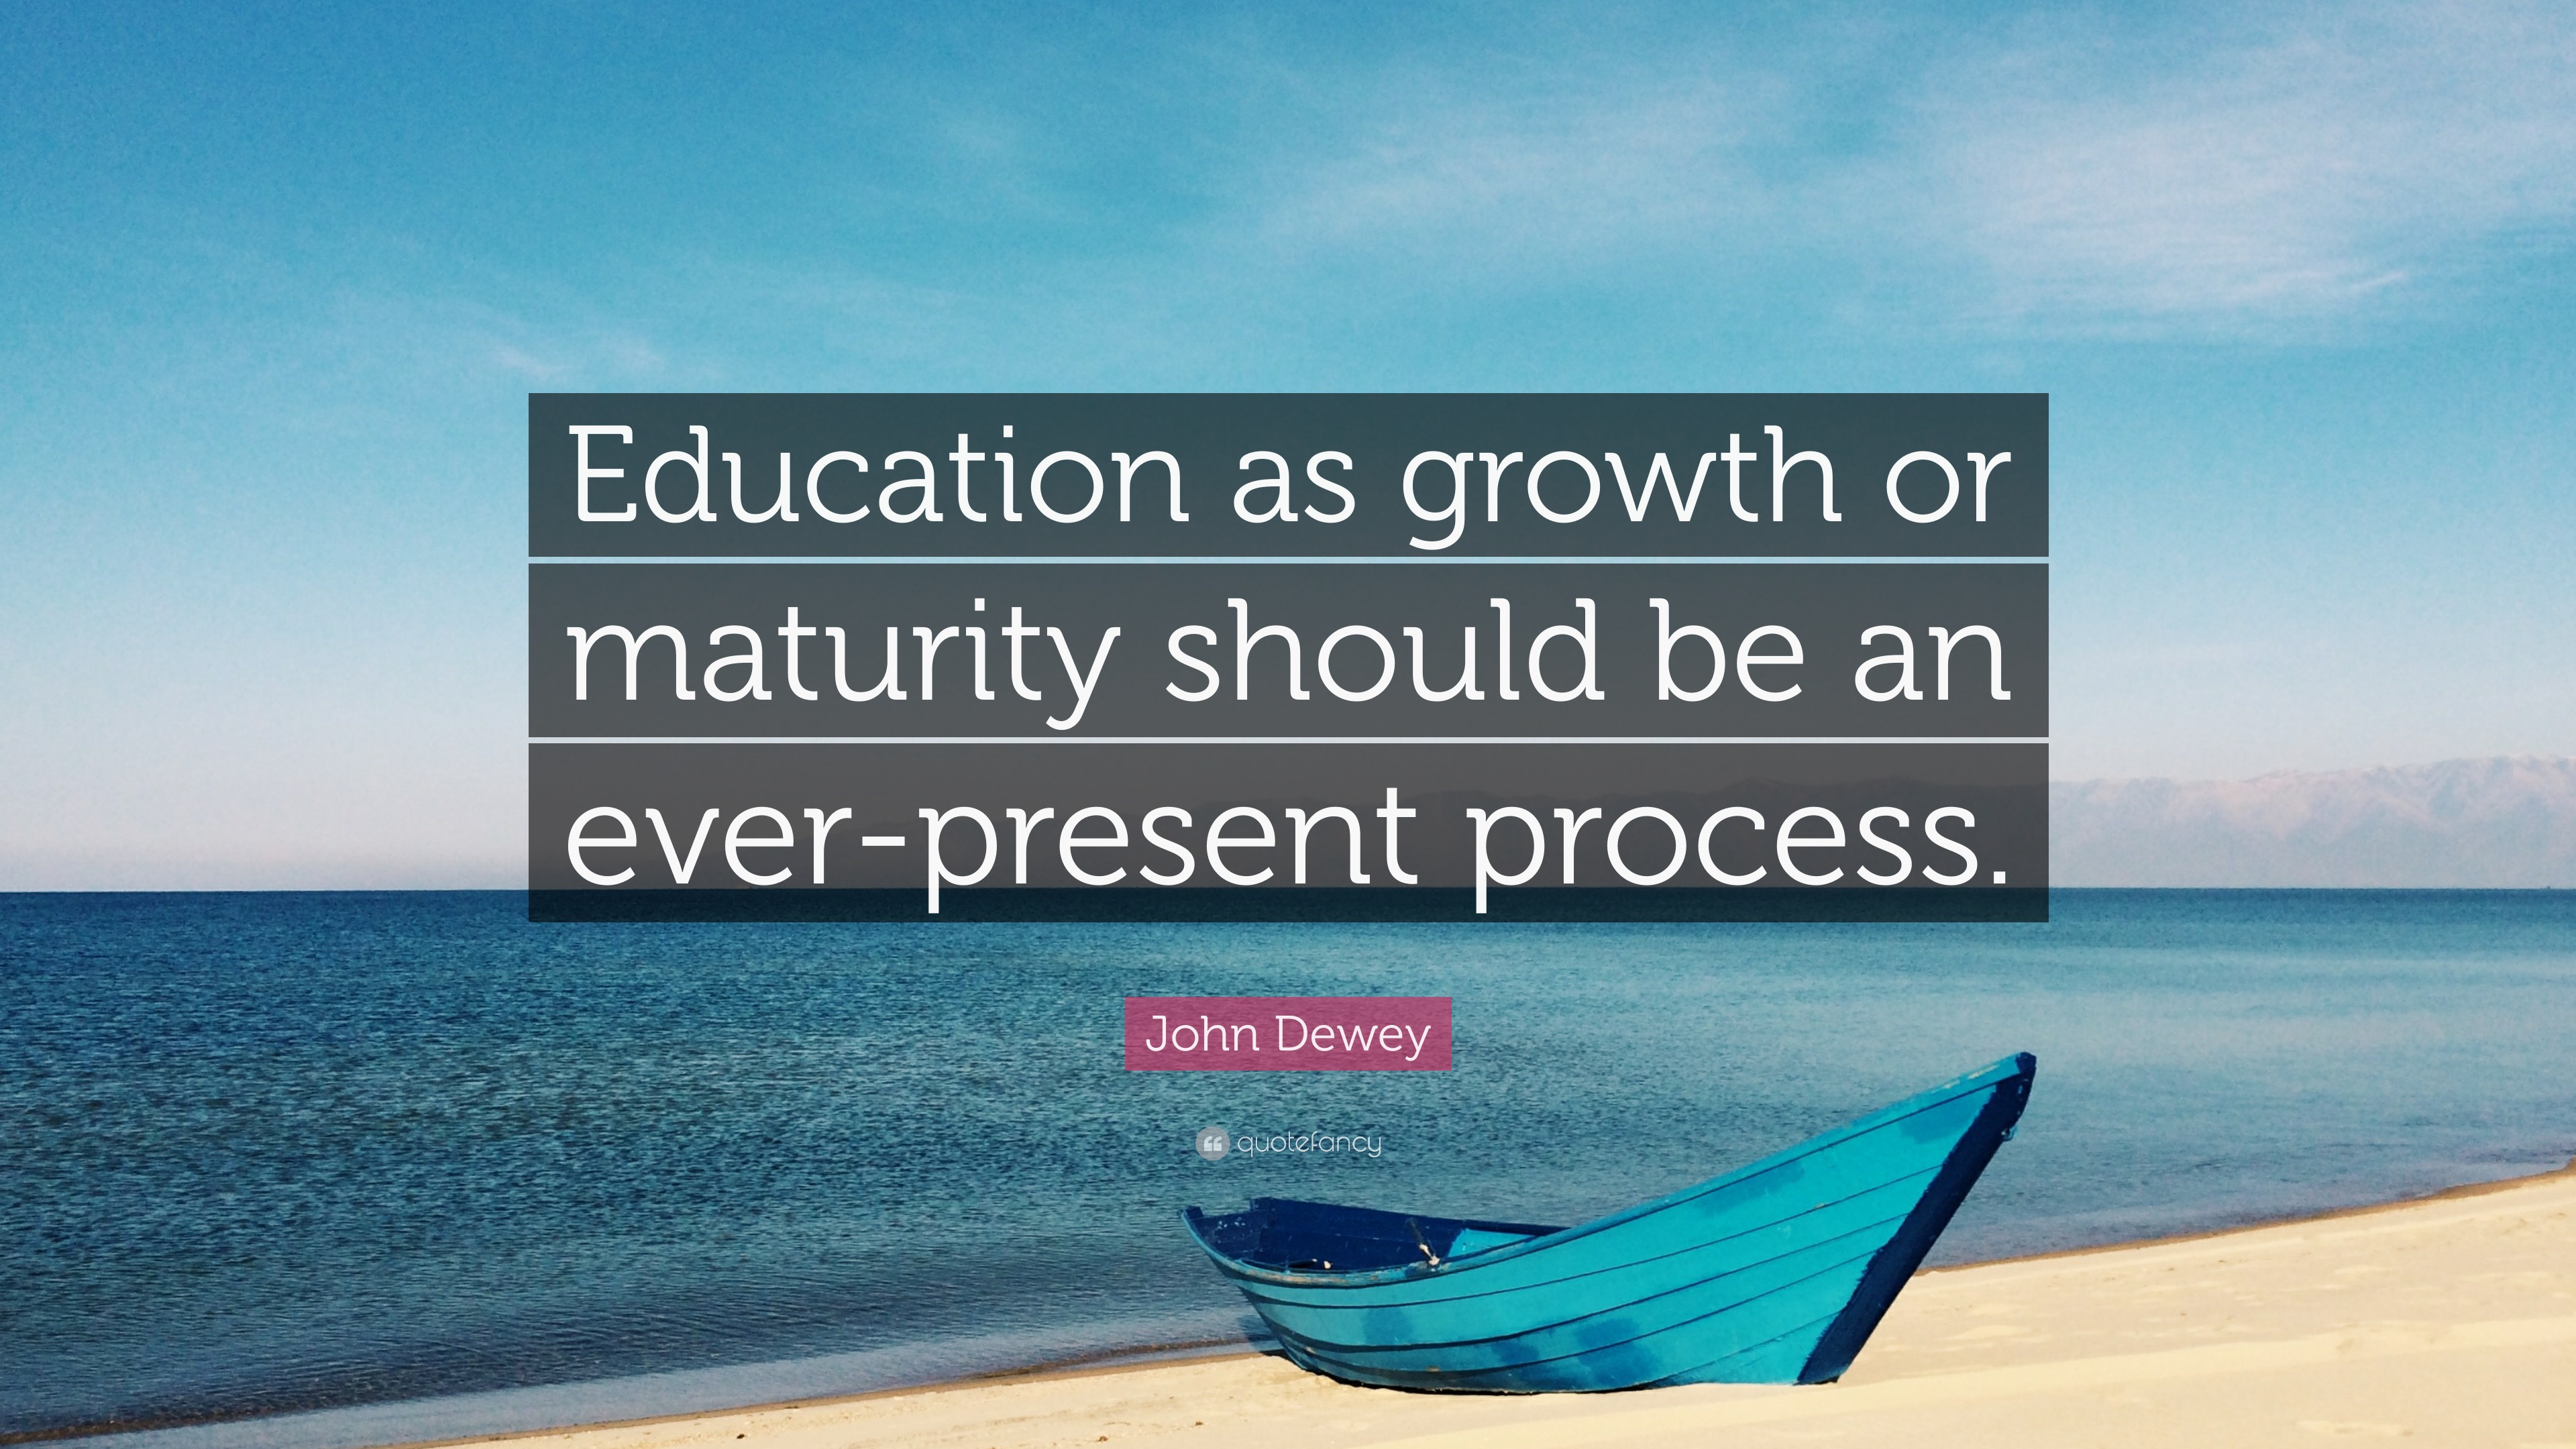 John Dewey Quote: “Education as growth or maturity should be an ever ...